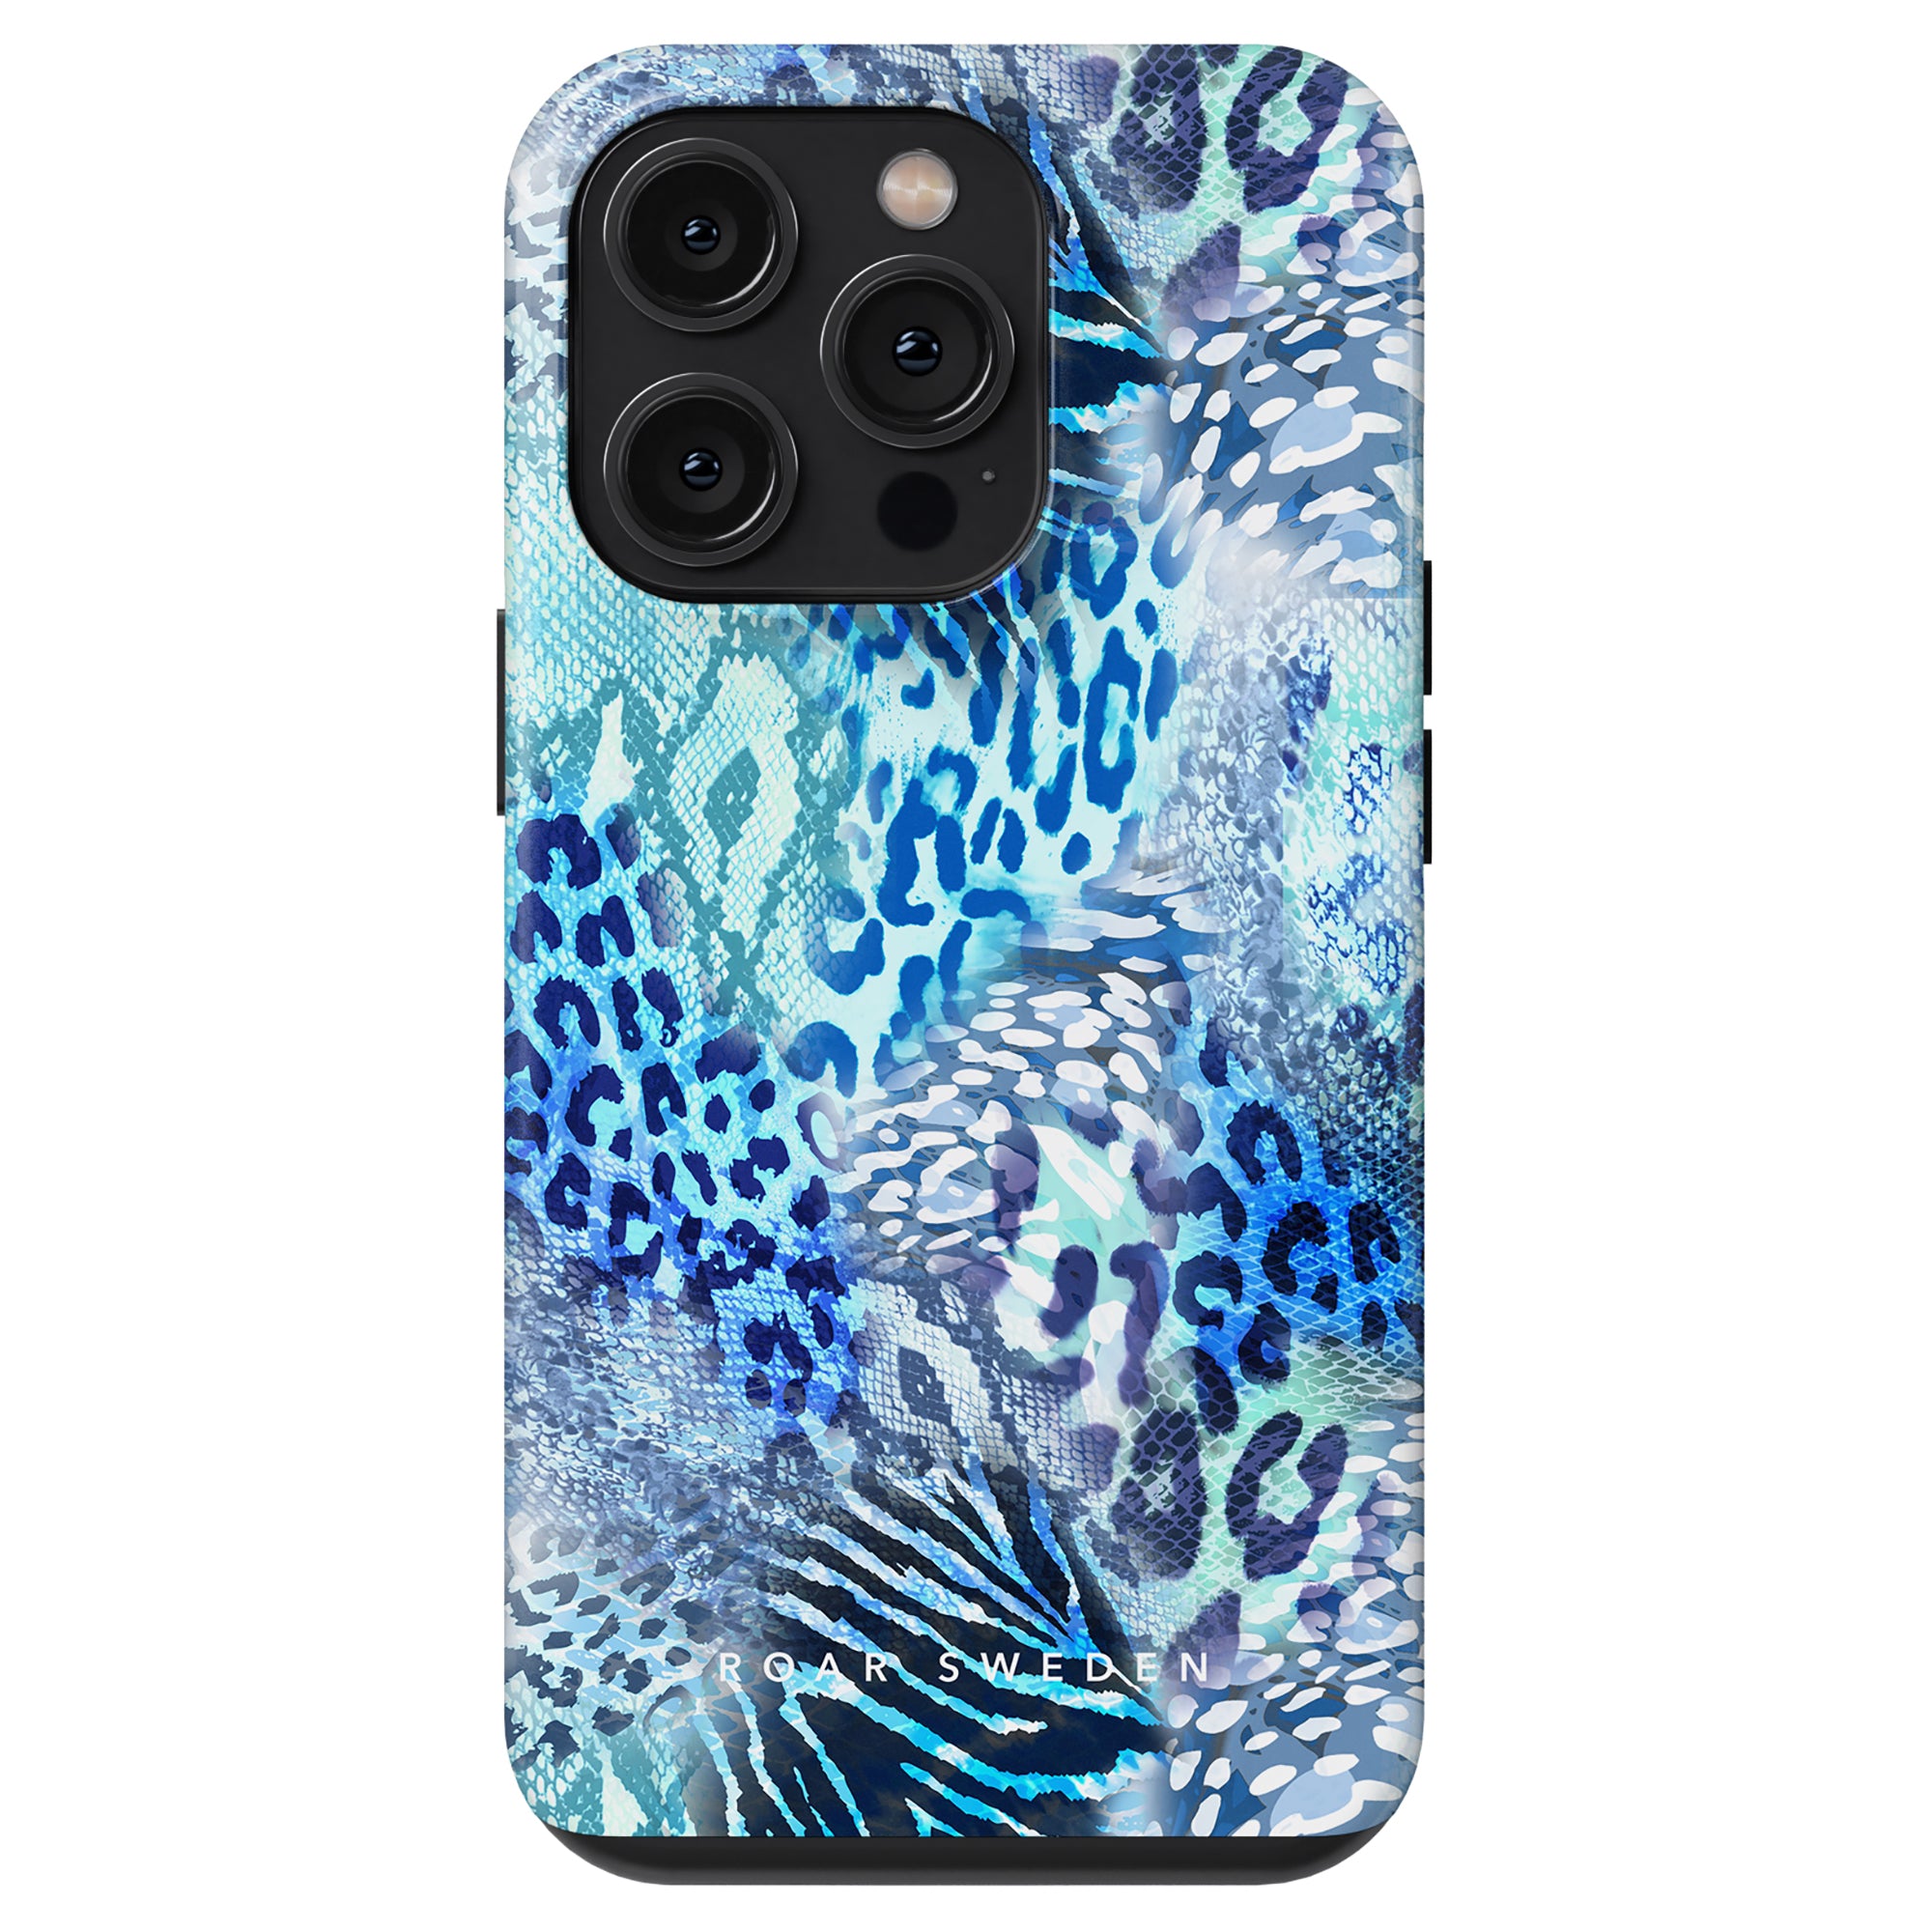 A smartphone with a blue and green patterned Snow Leopard - Tough Case featuring various abstract animal prints. It has three rear cameras, and the text "IDEAL OF SWEDEN" is visible at the bottom of the tough case.